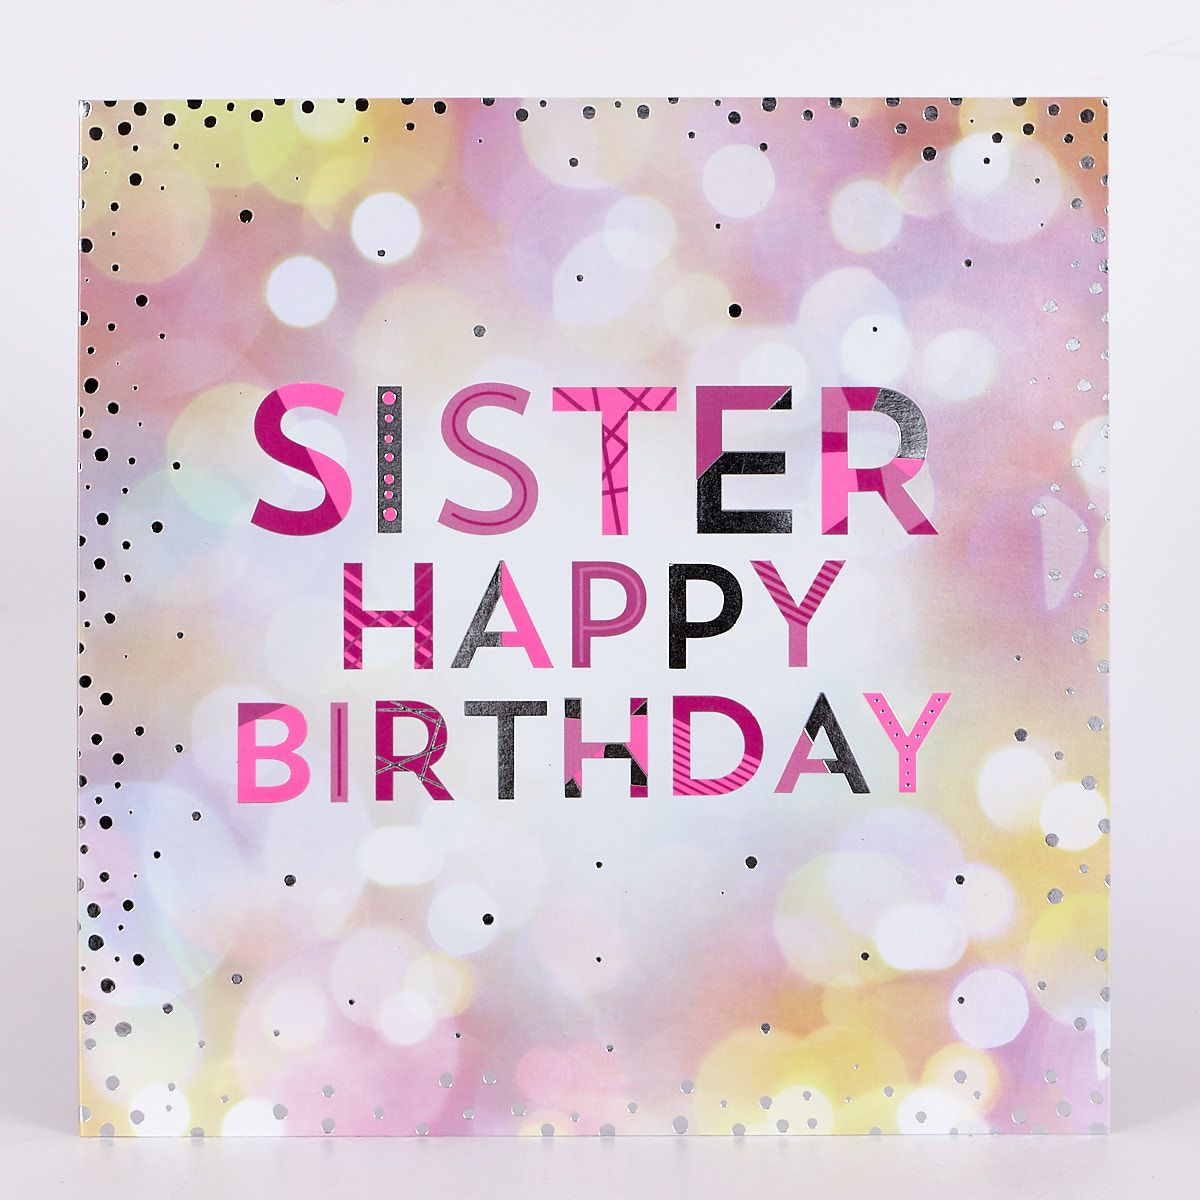 Happy Birthday Wishes To Co Sister HD Wallpaper for PC Desktop and Smartphones